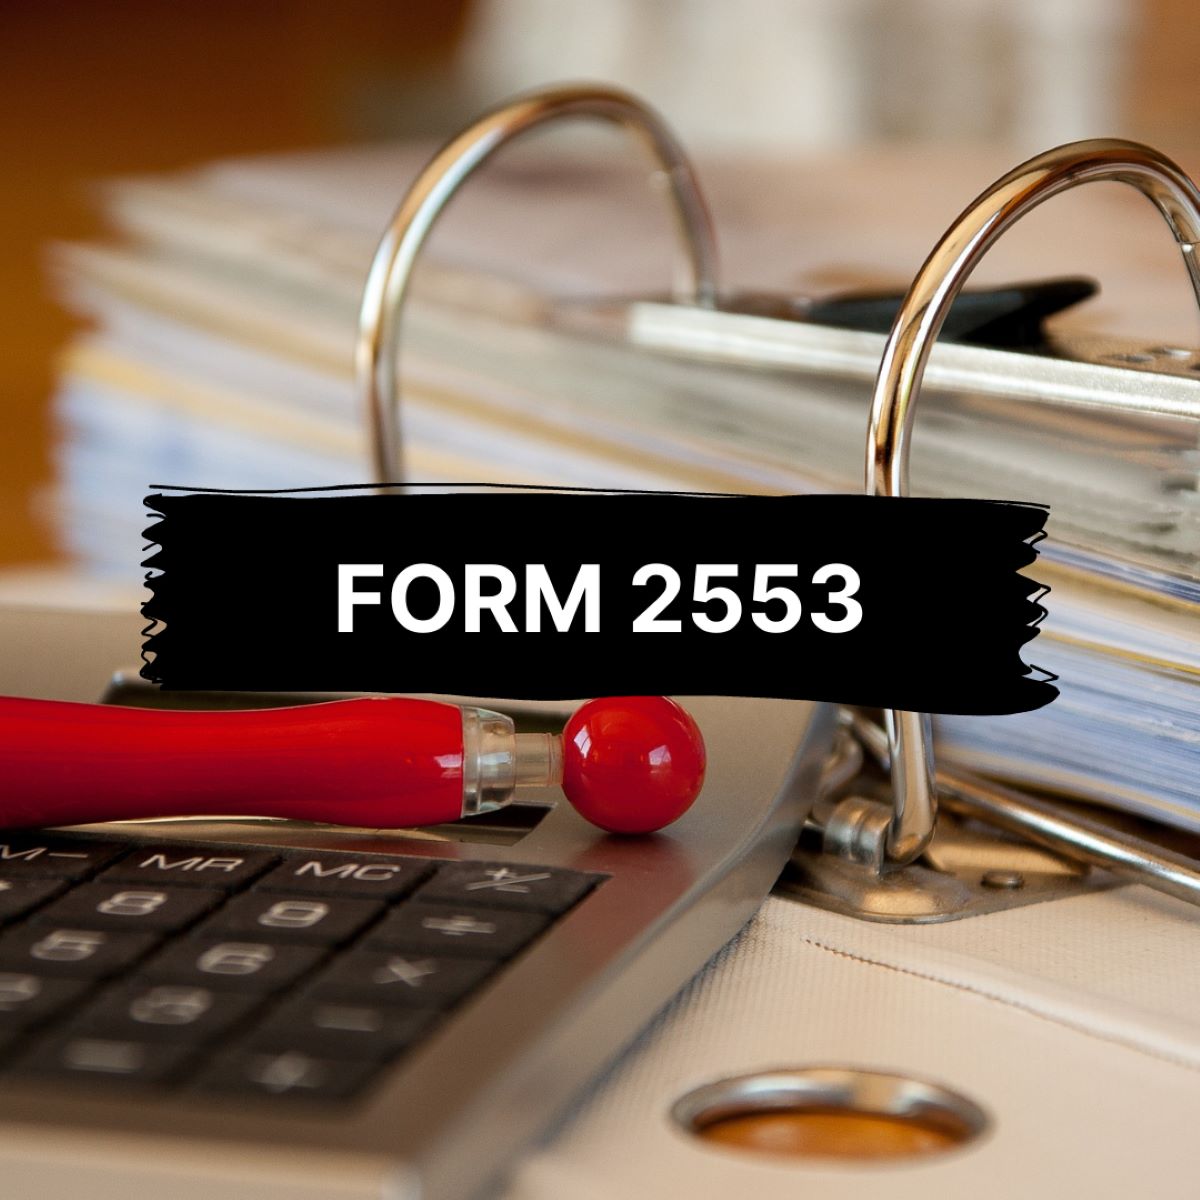 What Is IRS Form 2553 Used For?